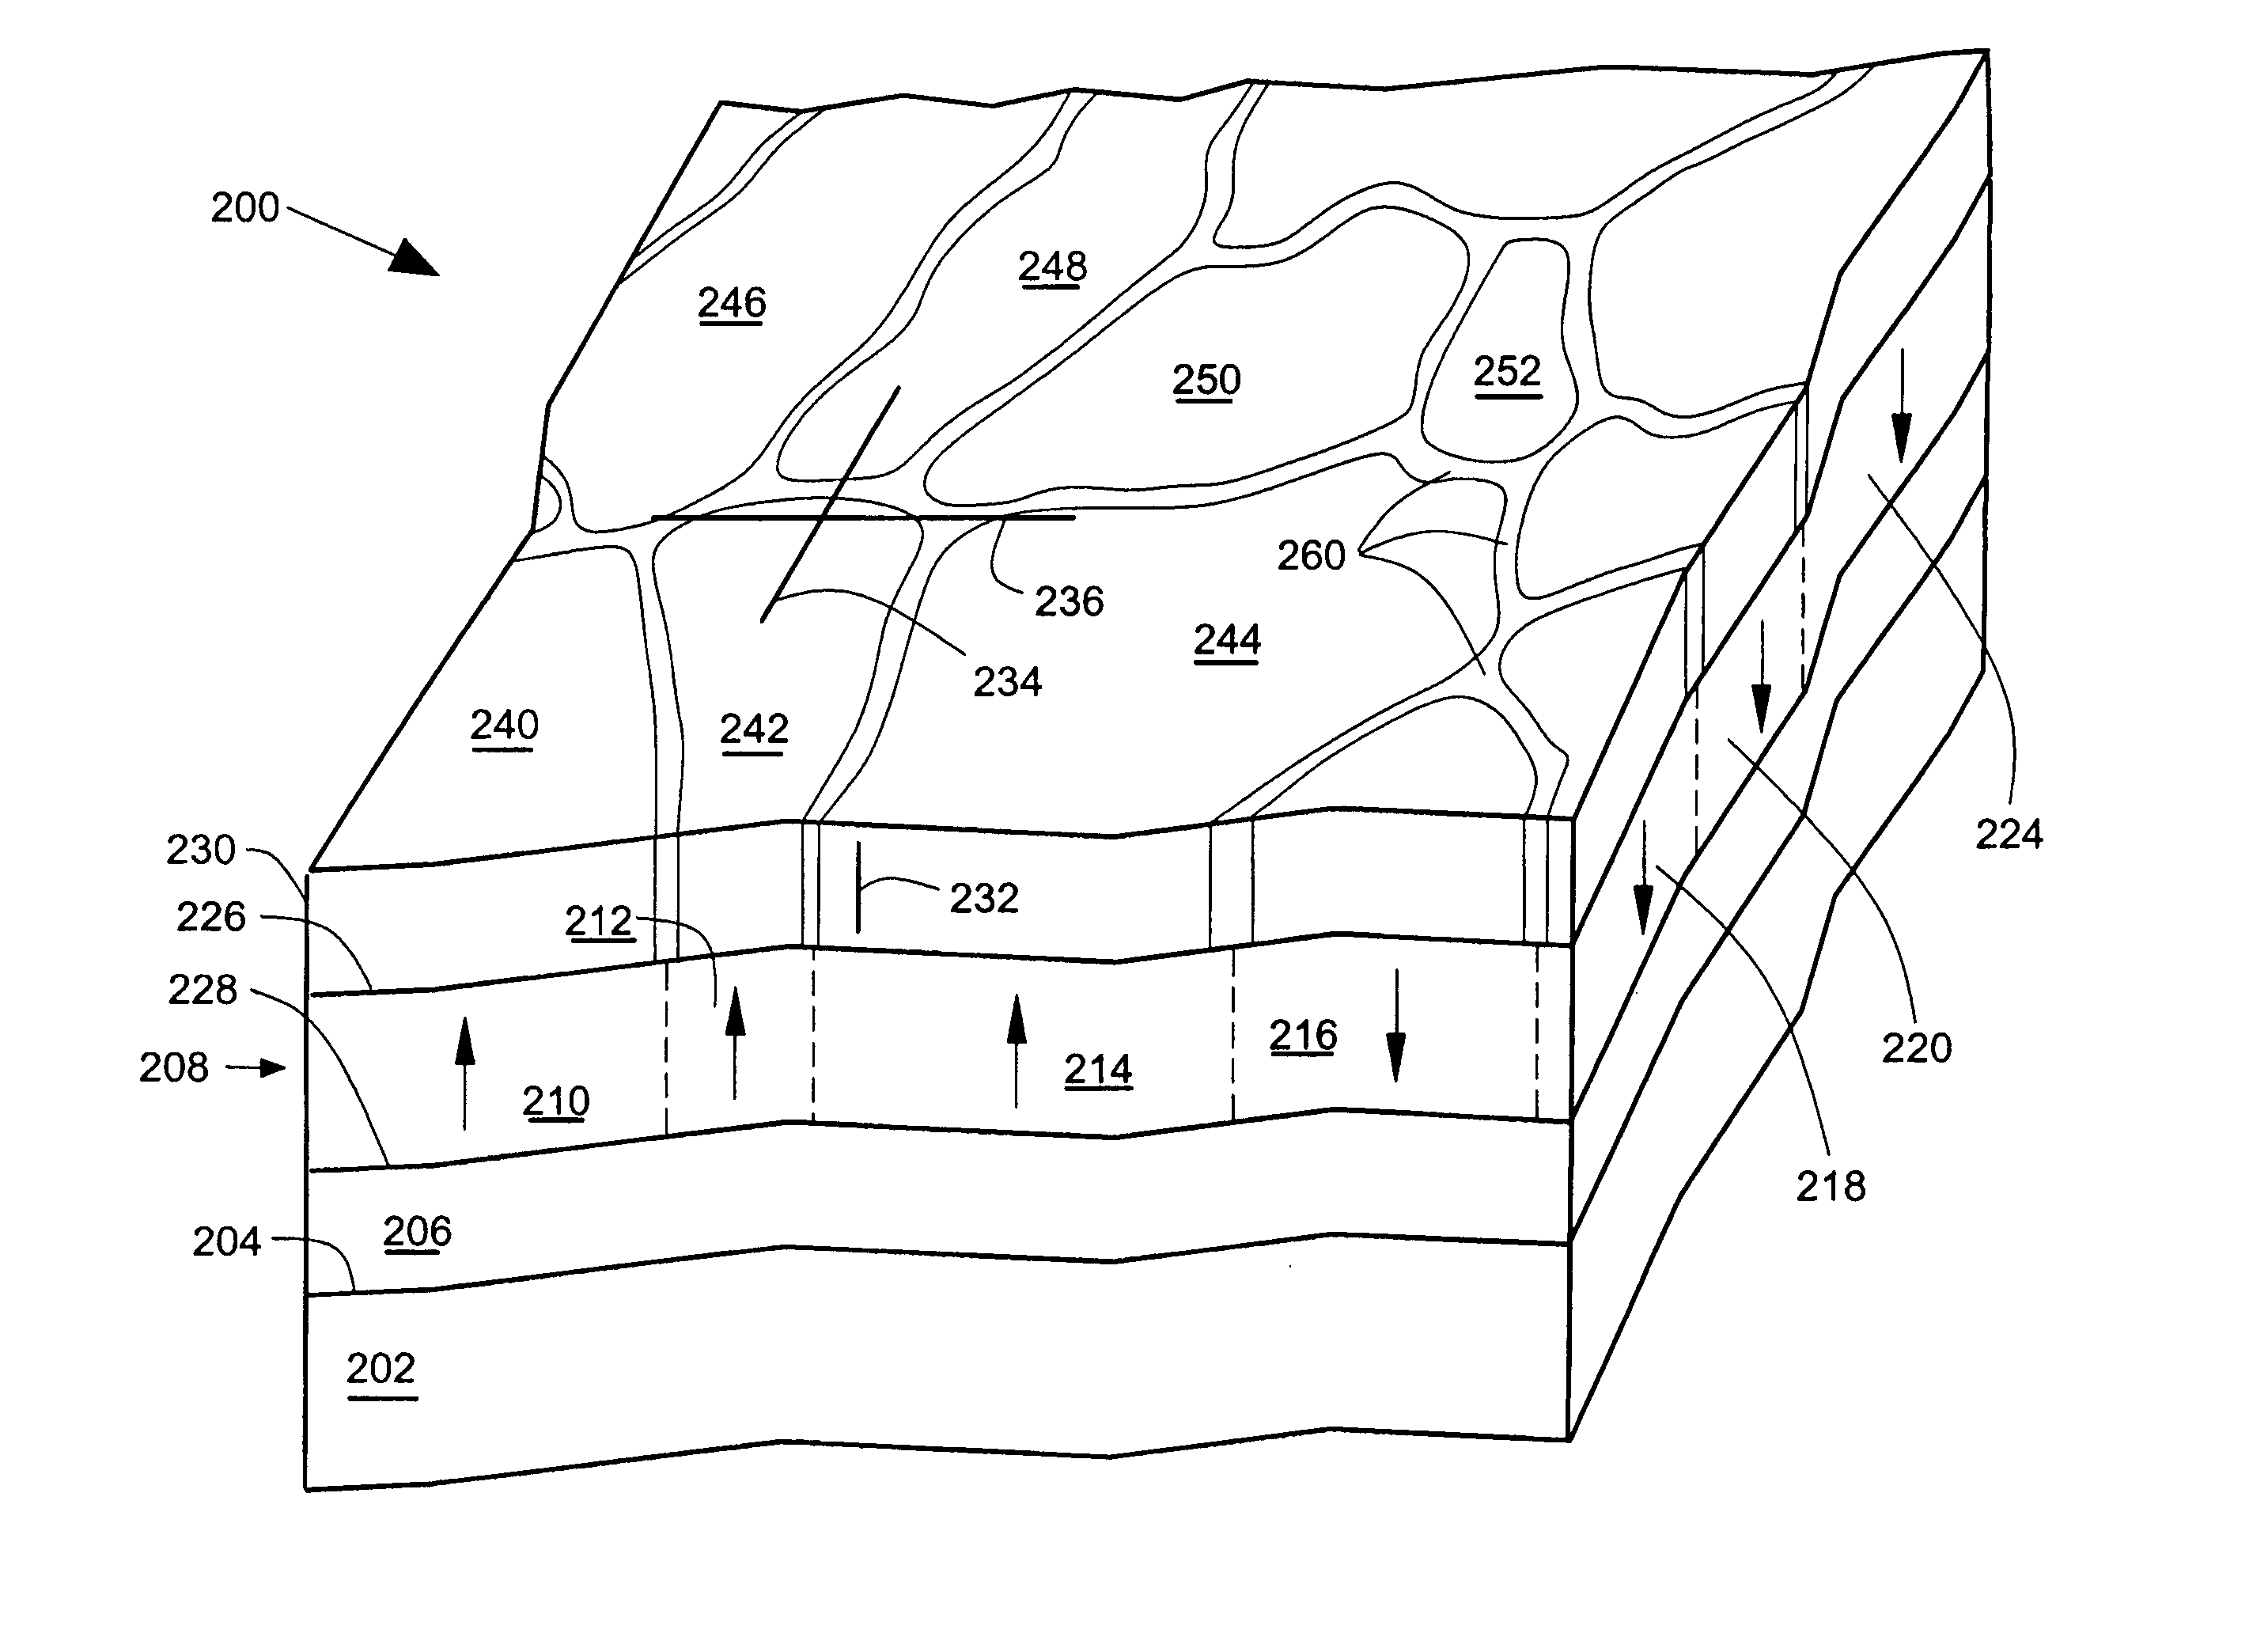 Memory array having a layer with electrical conductivity anisotropy